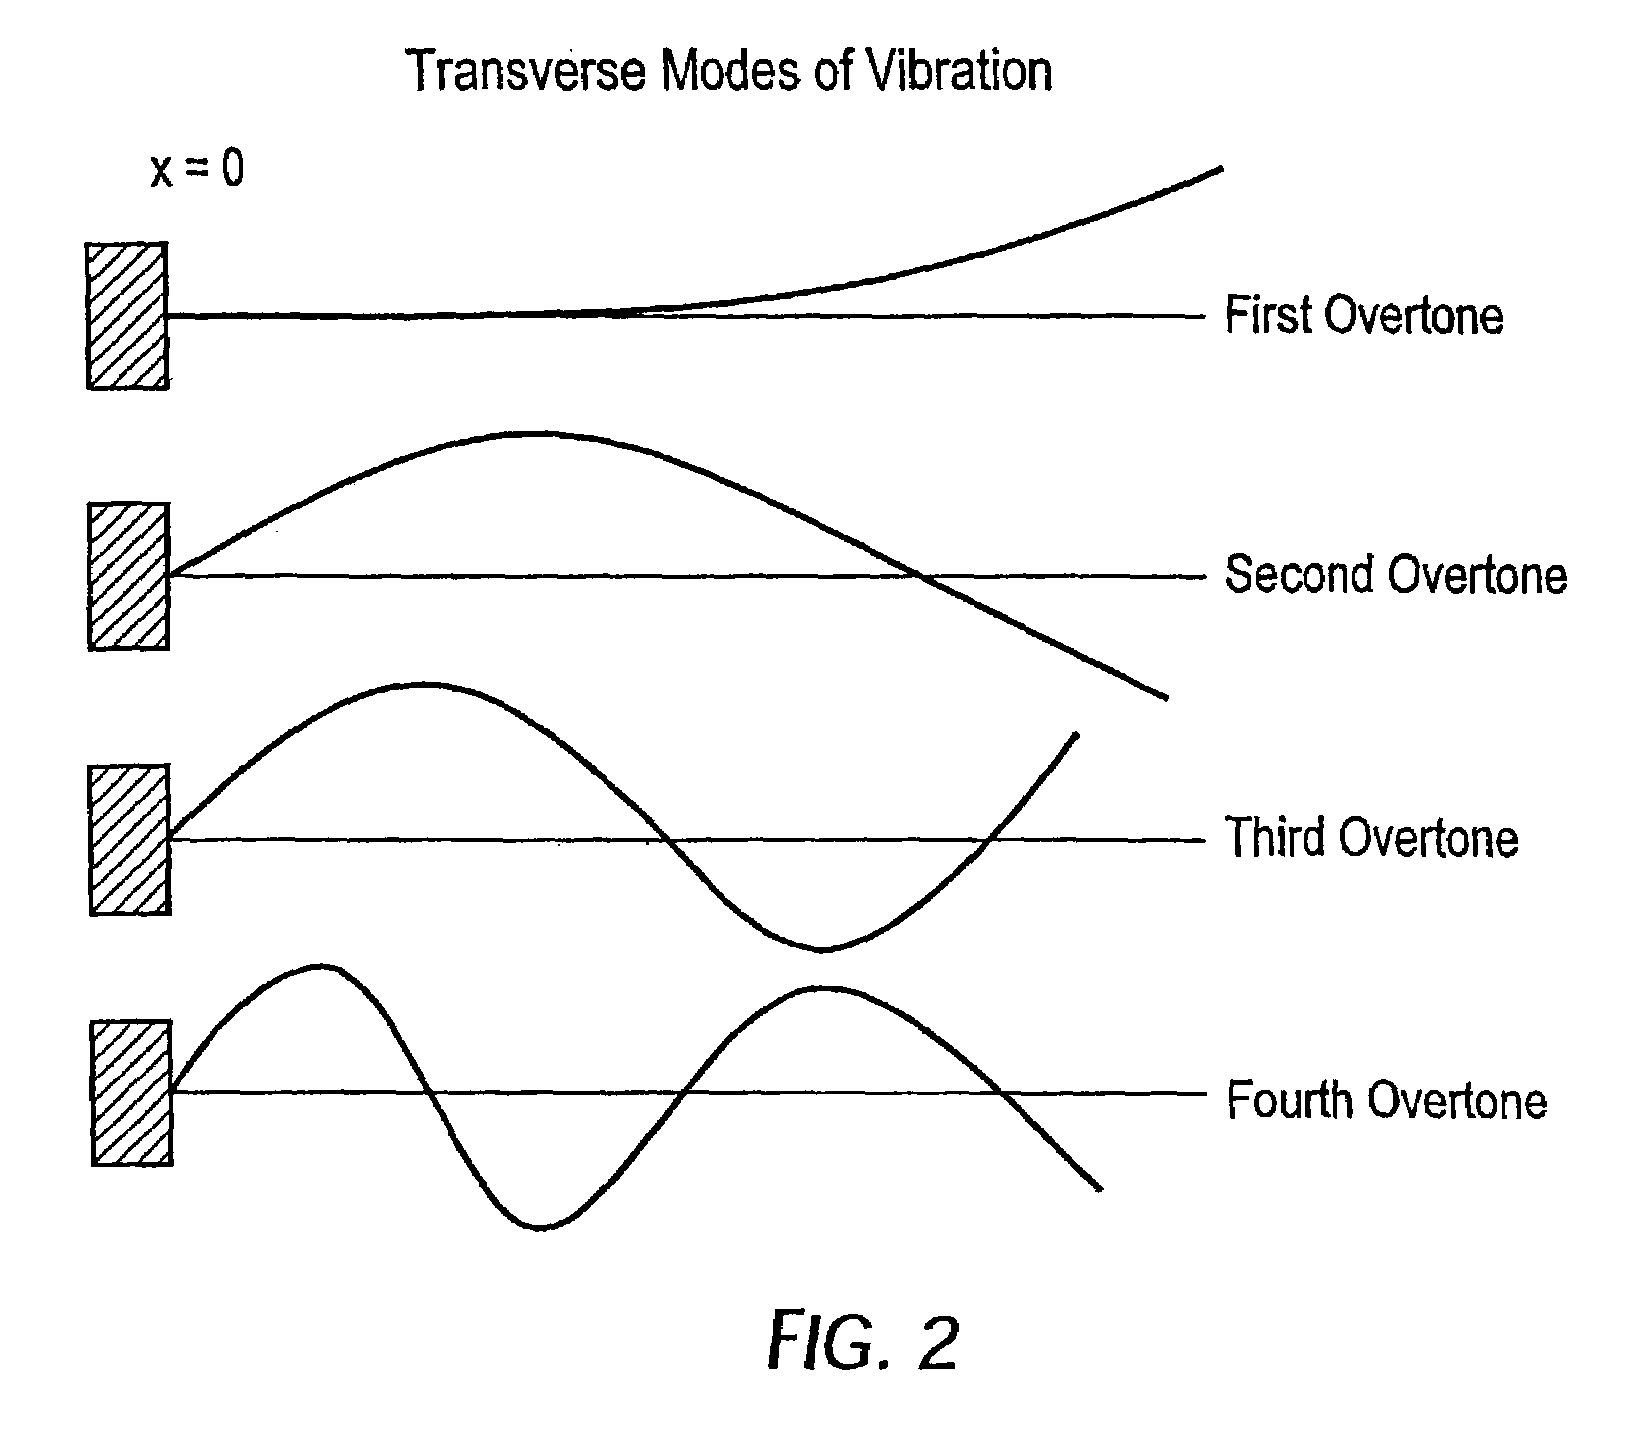 Ultrasonic medical device operating in a transverse mode